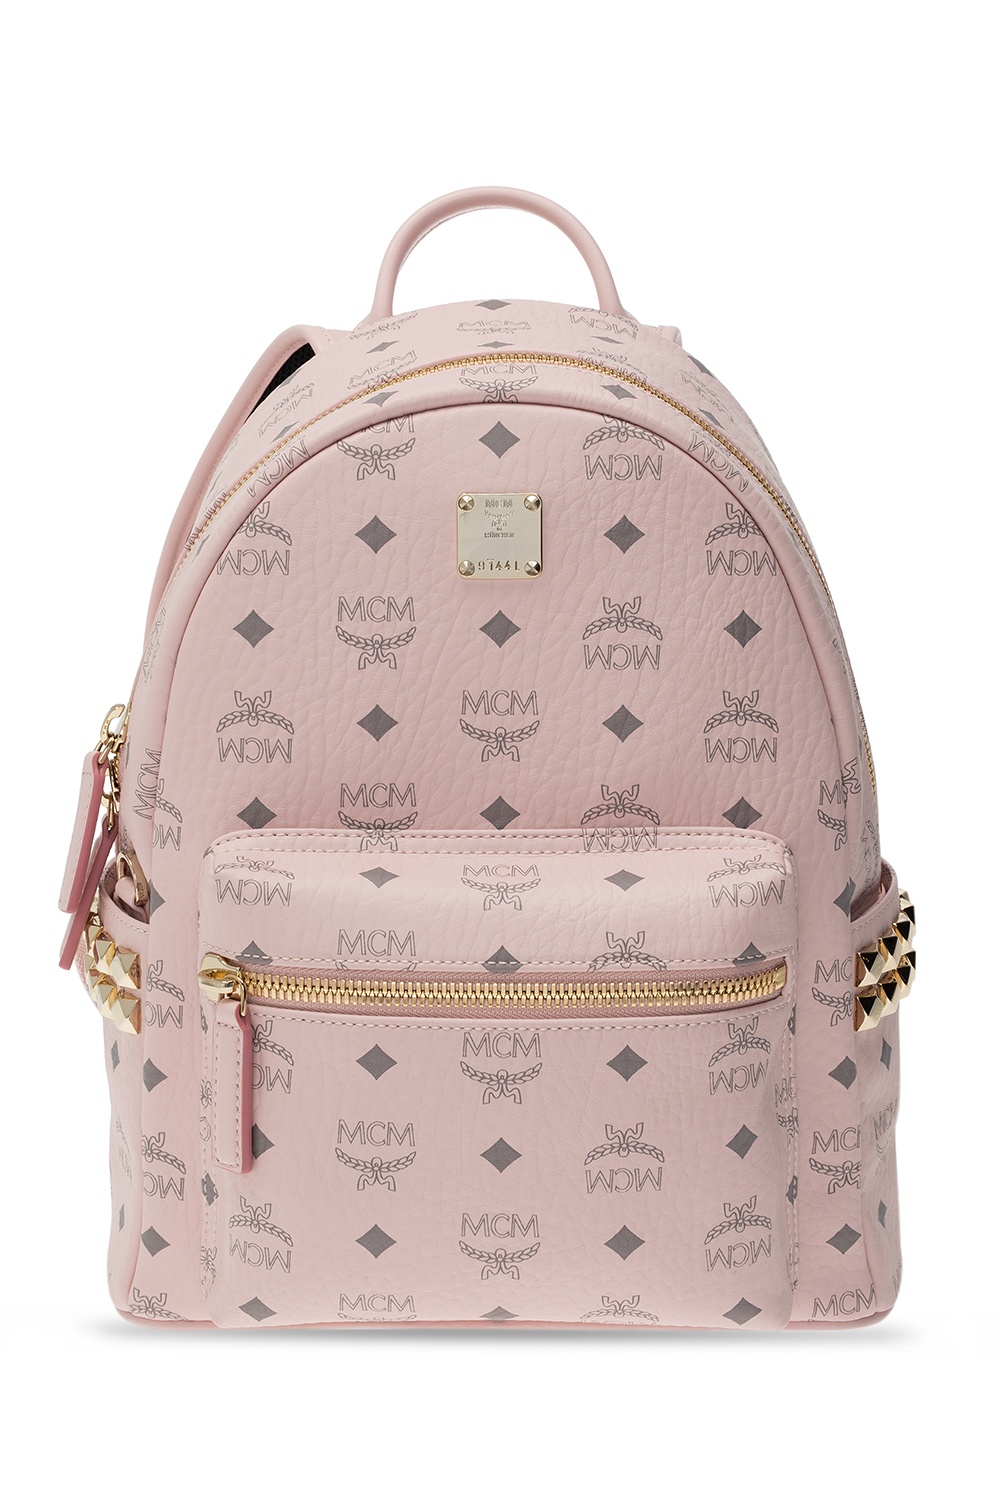 MCM backpack Pink / Style On A Budget